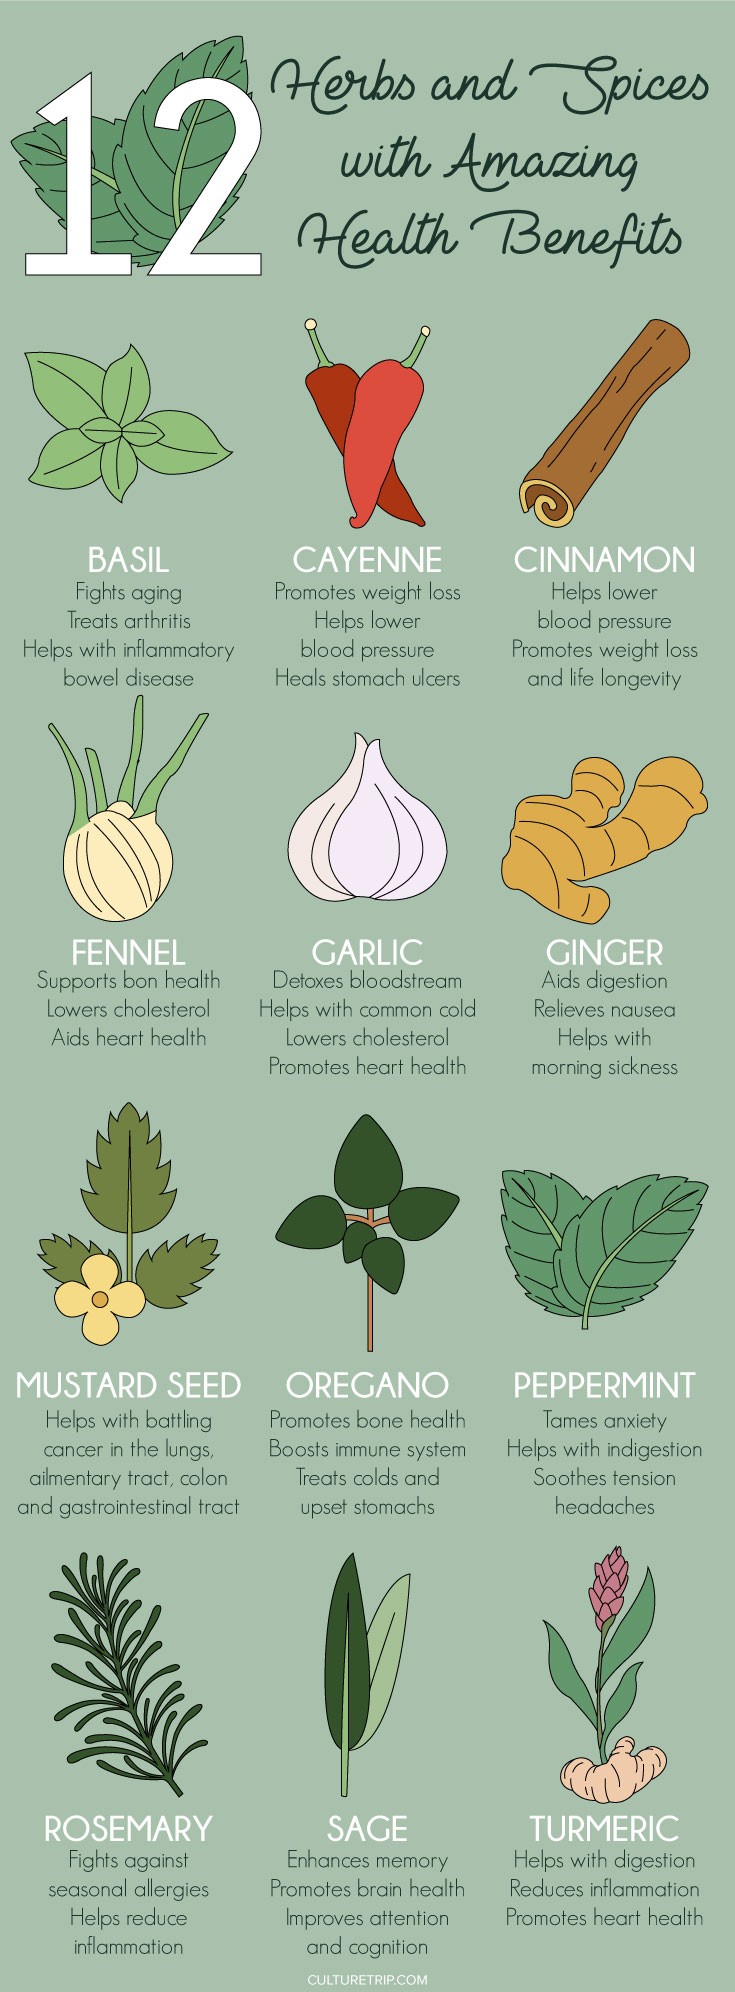 The Amazing Health Benefits of 12 Herbs and Spices